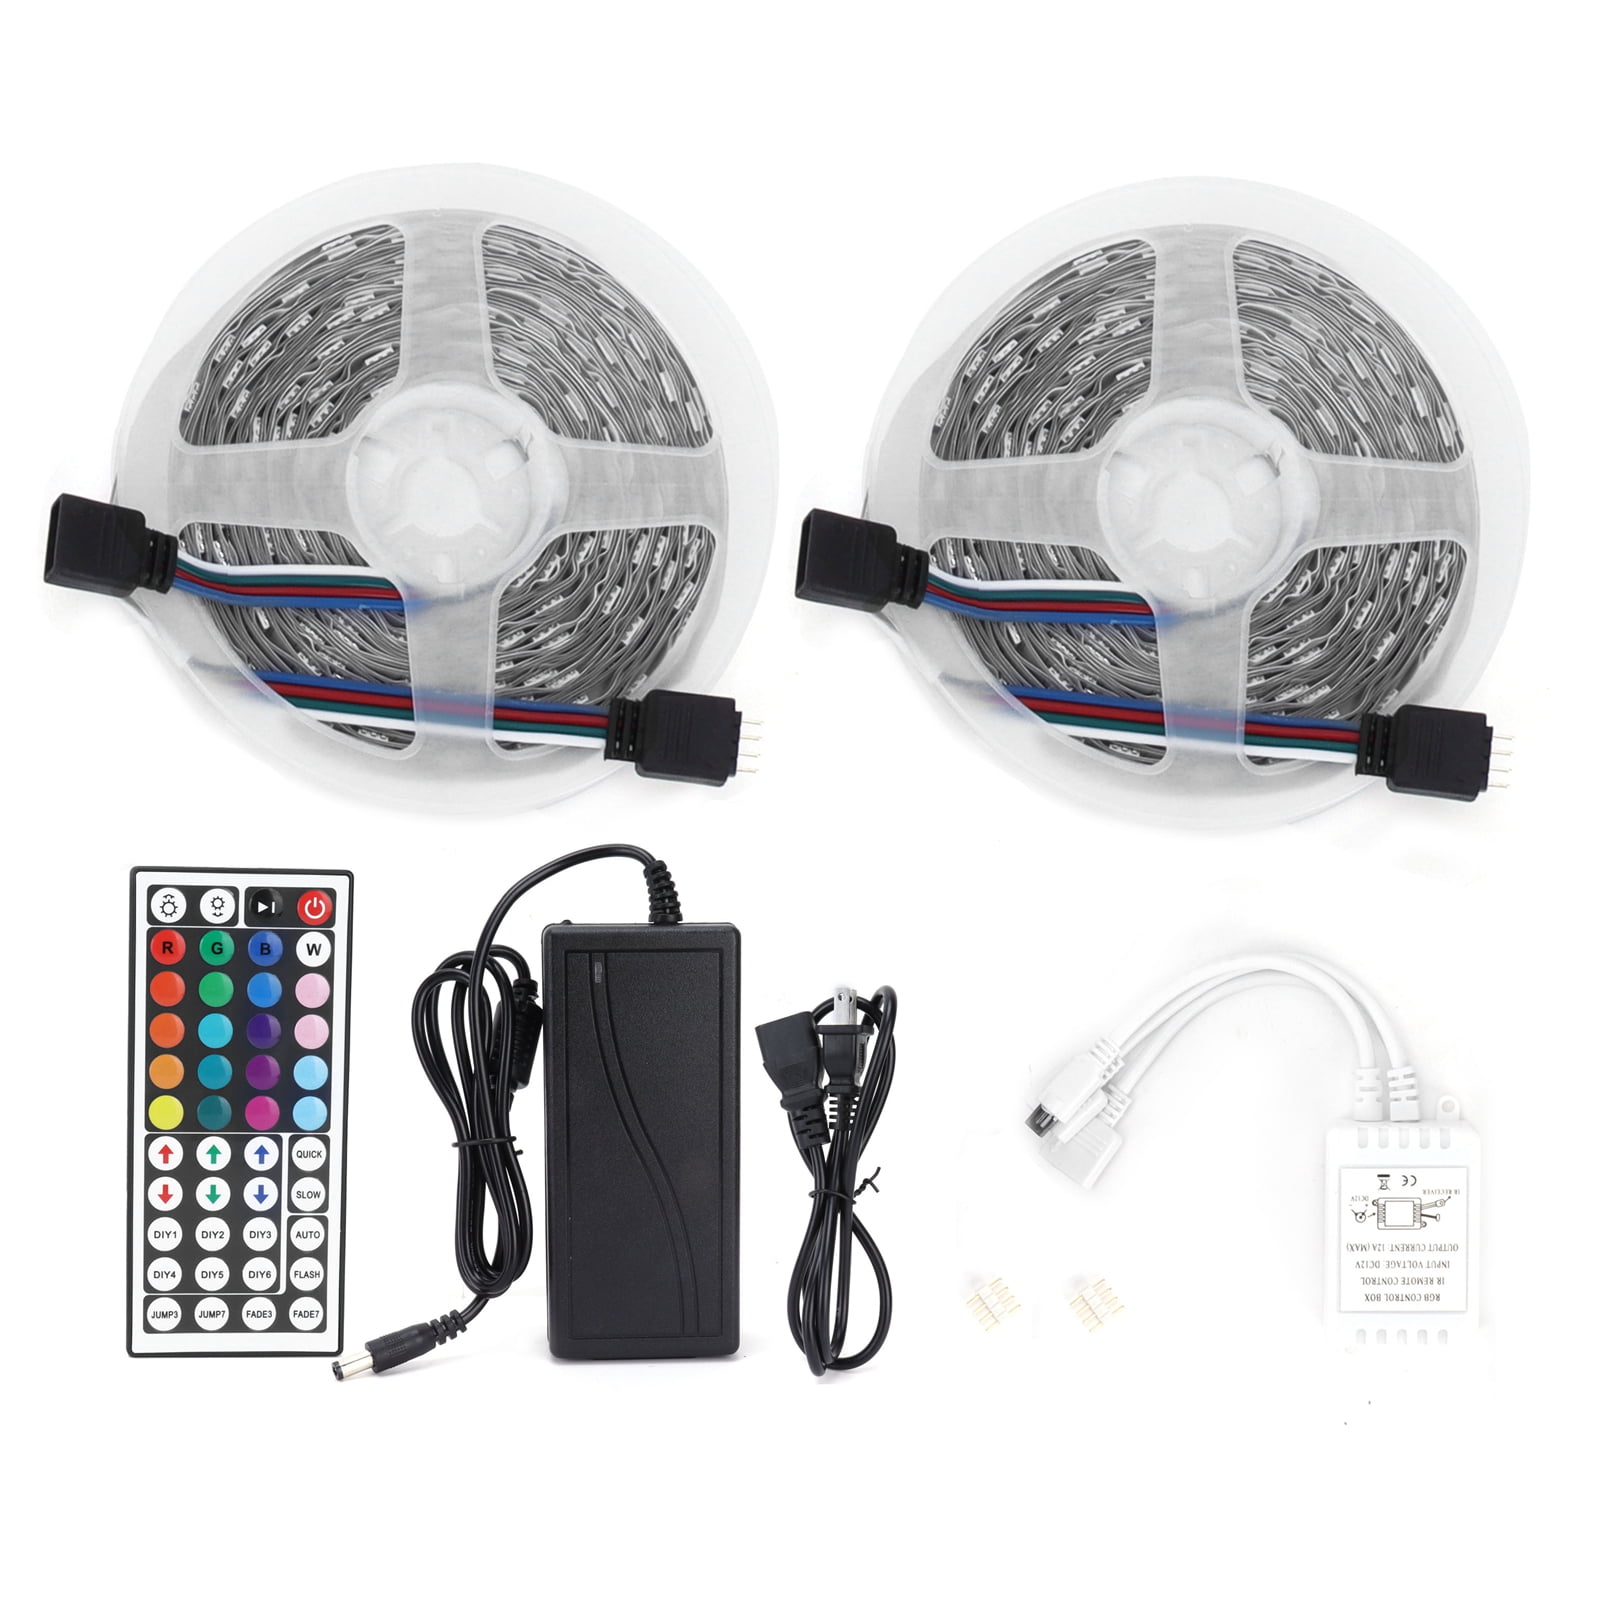 Details about   USB LED Flexible String/Strip Light Remote Control Wedding Xmas Party 2-10M USA 